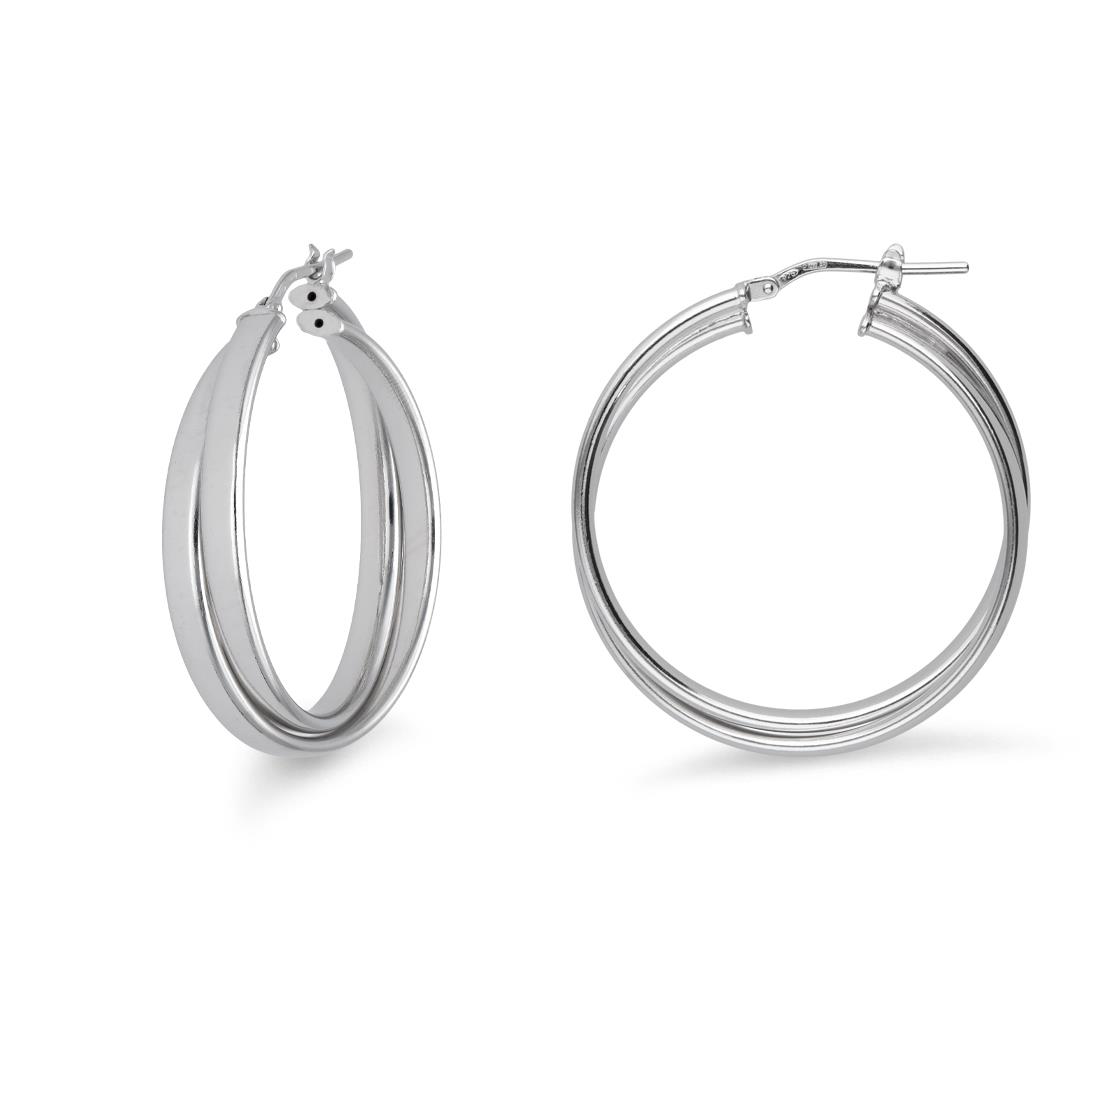 Hula Hoop collection double intertwined hoop earrings in 925 rhodium-plated silver - LUXURY MILANO